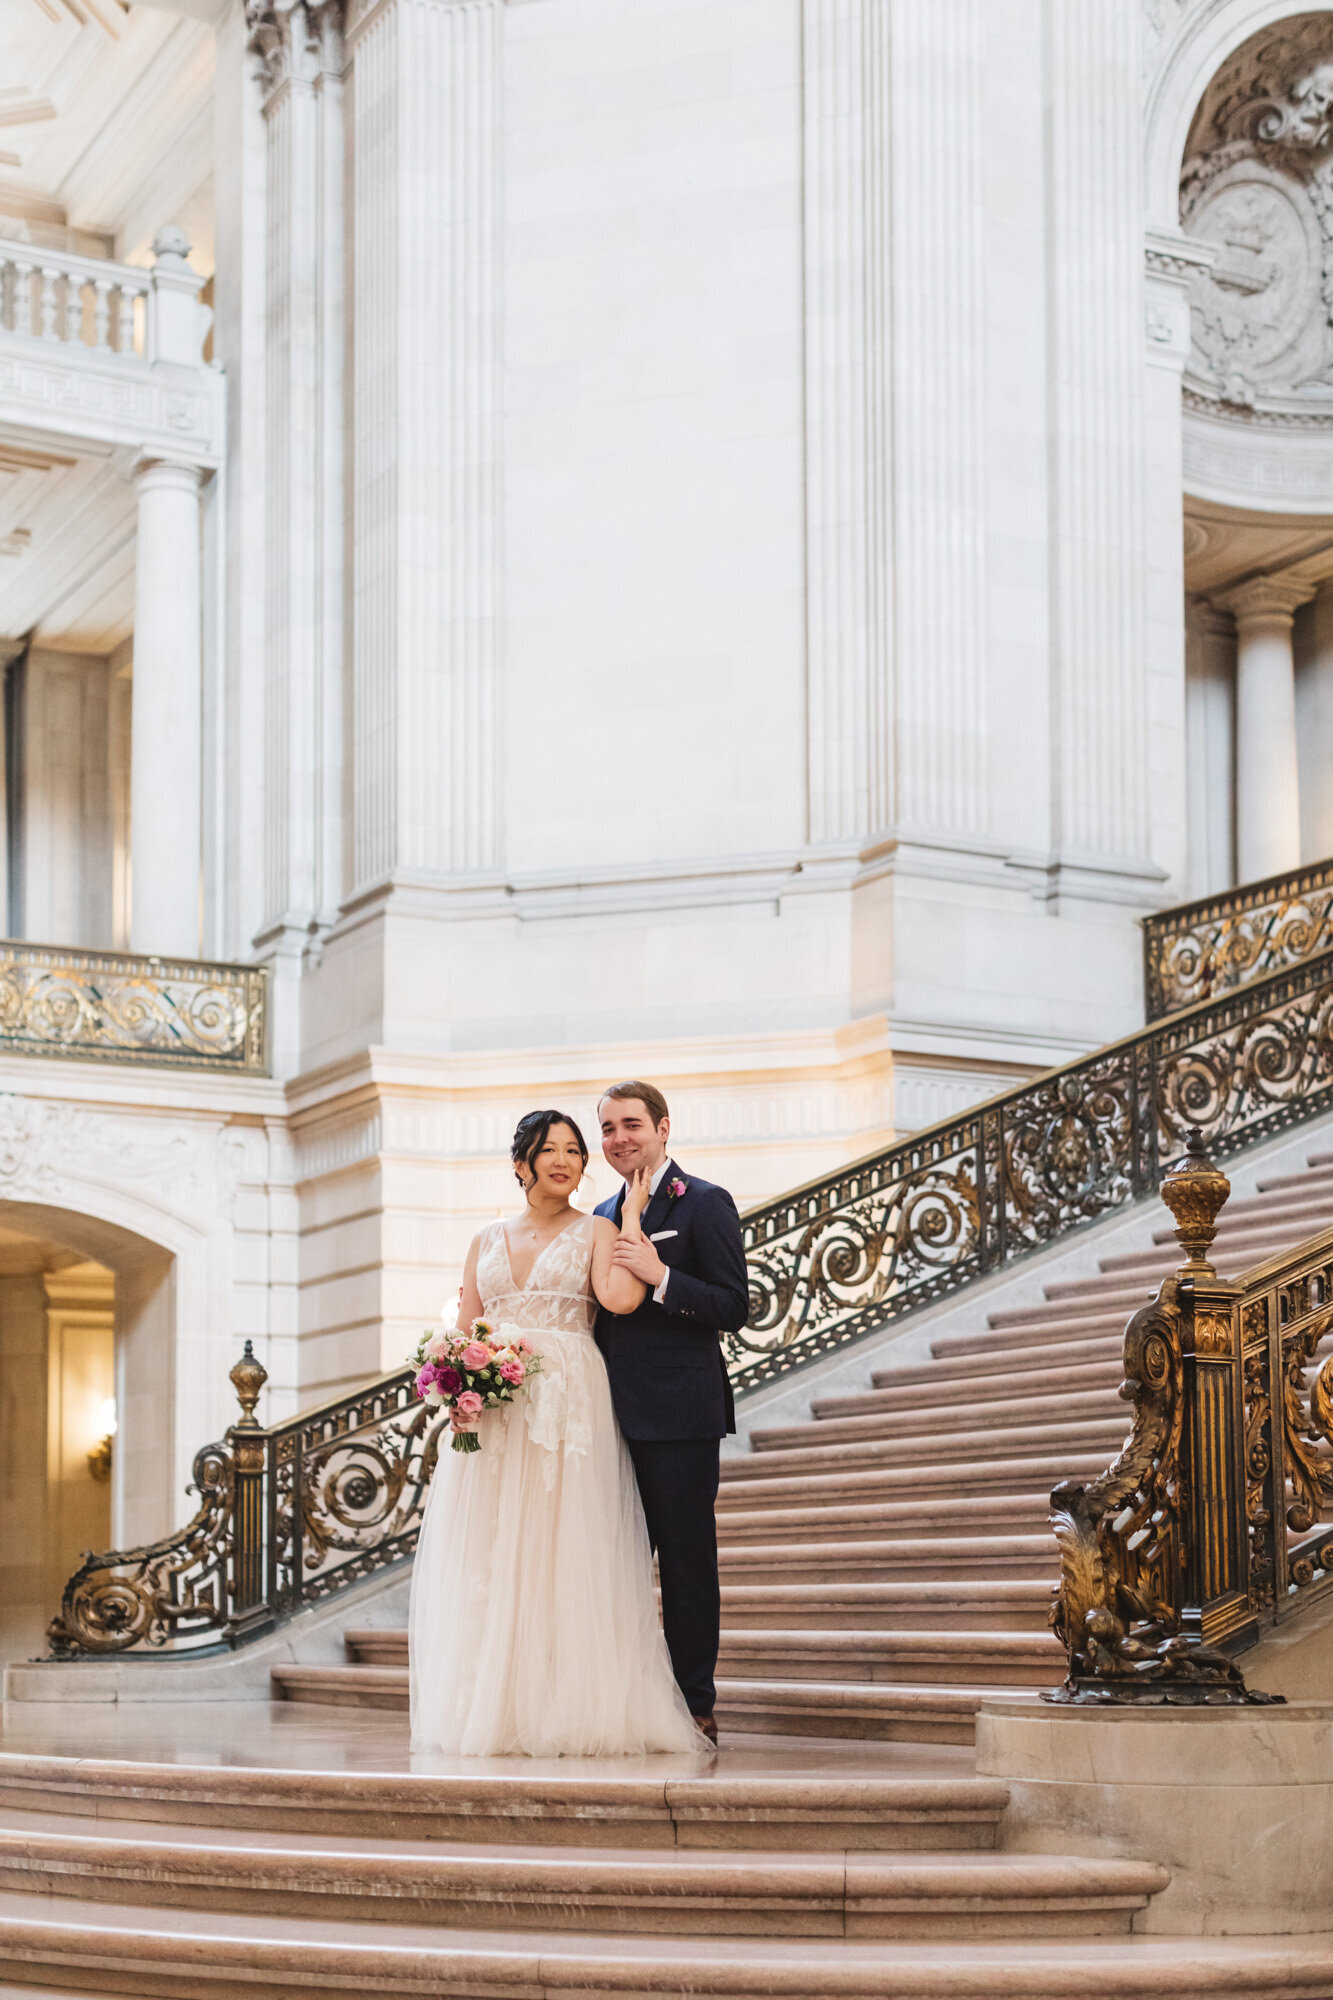 beautiful Grand Staircase shot with bride and groom